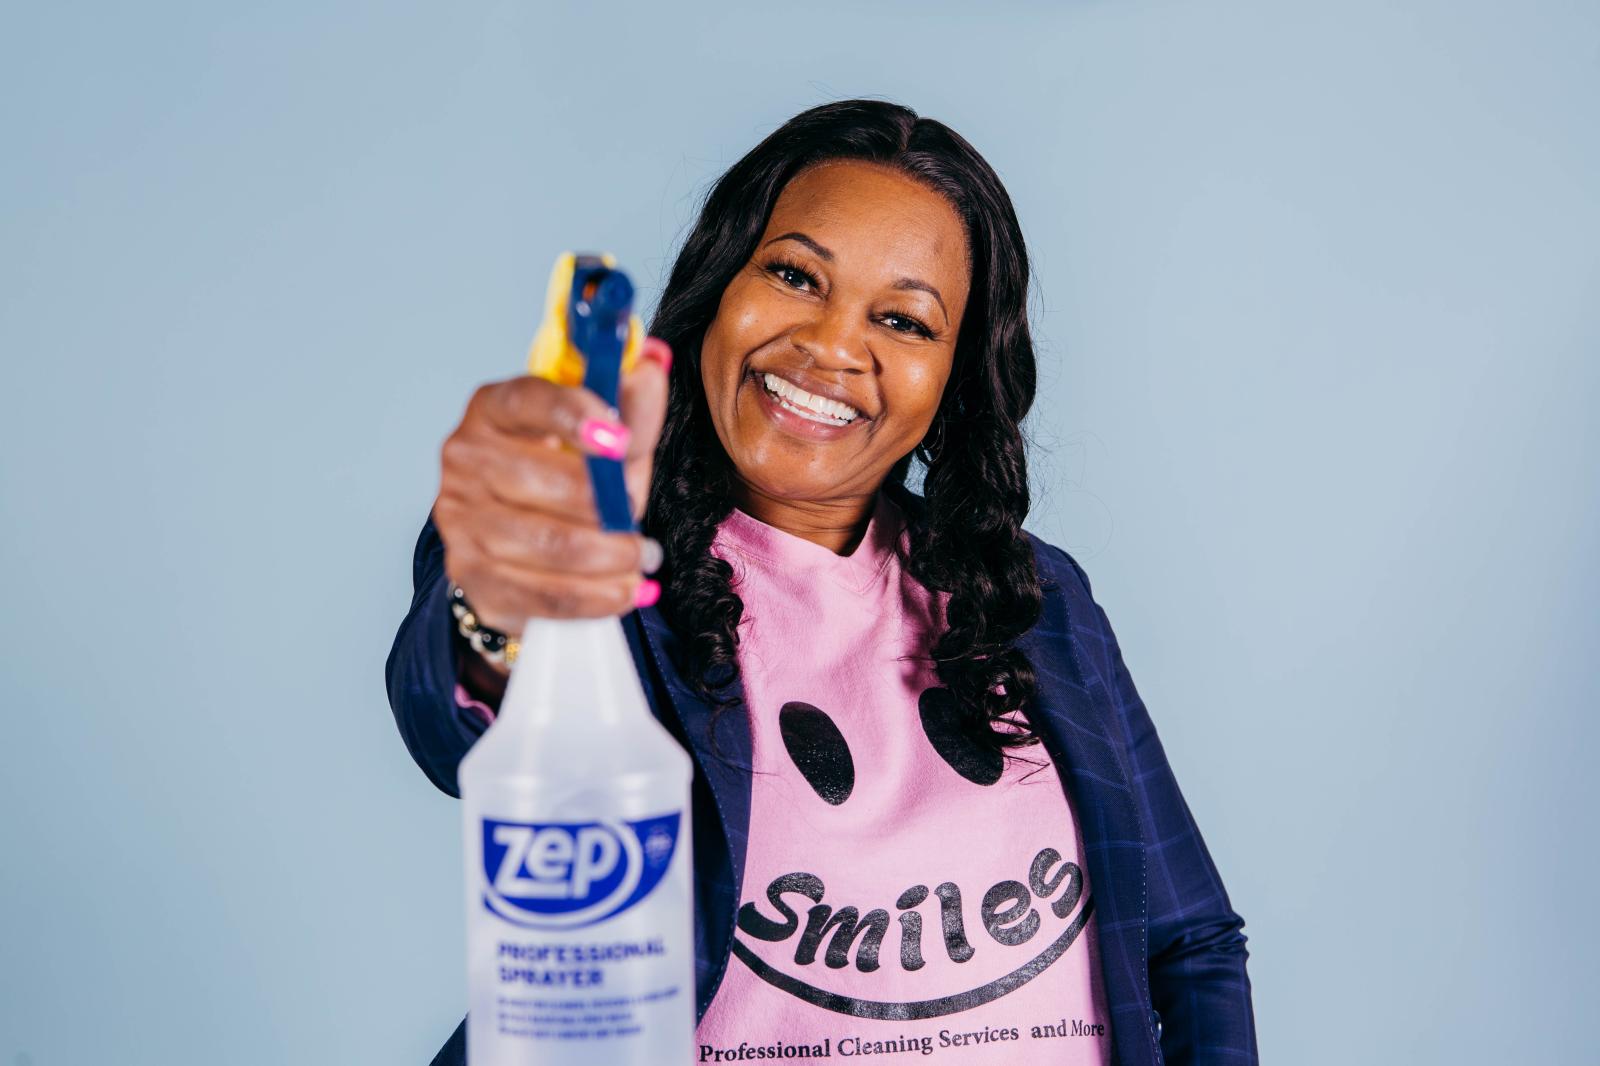 Angela Elder, founder of Smiles Professional Cleaning Services